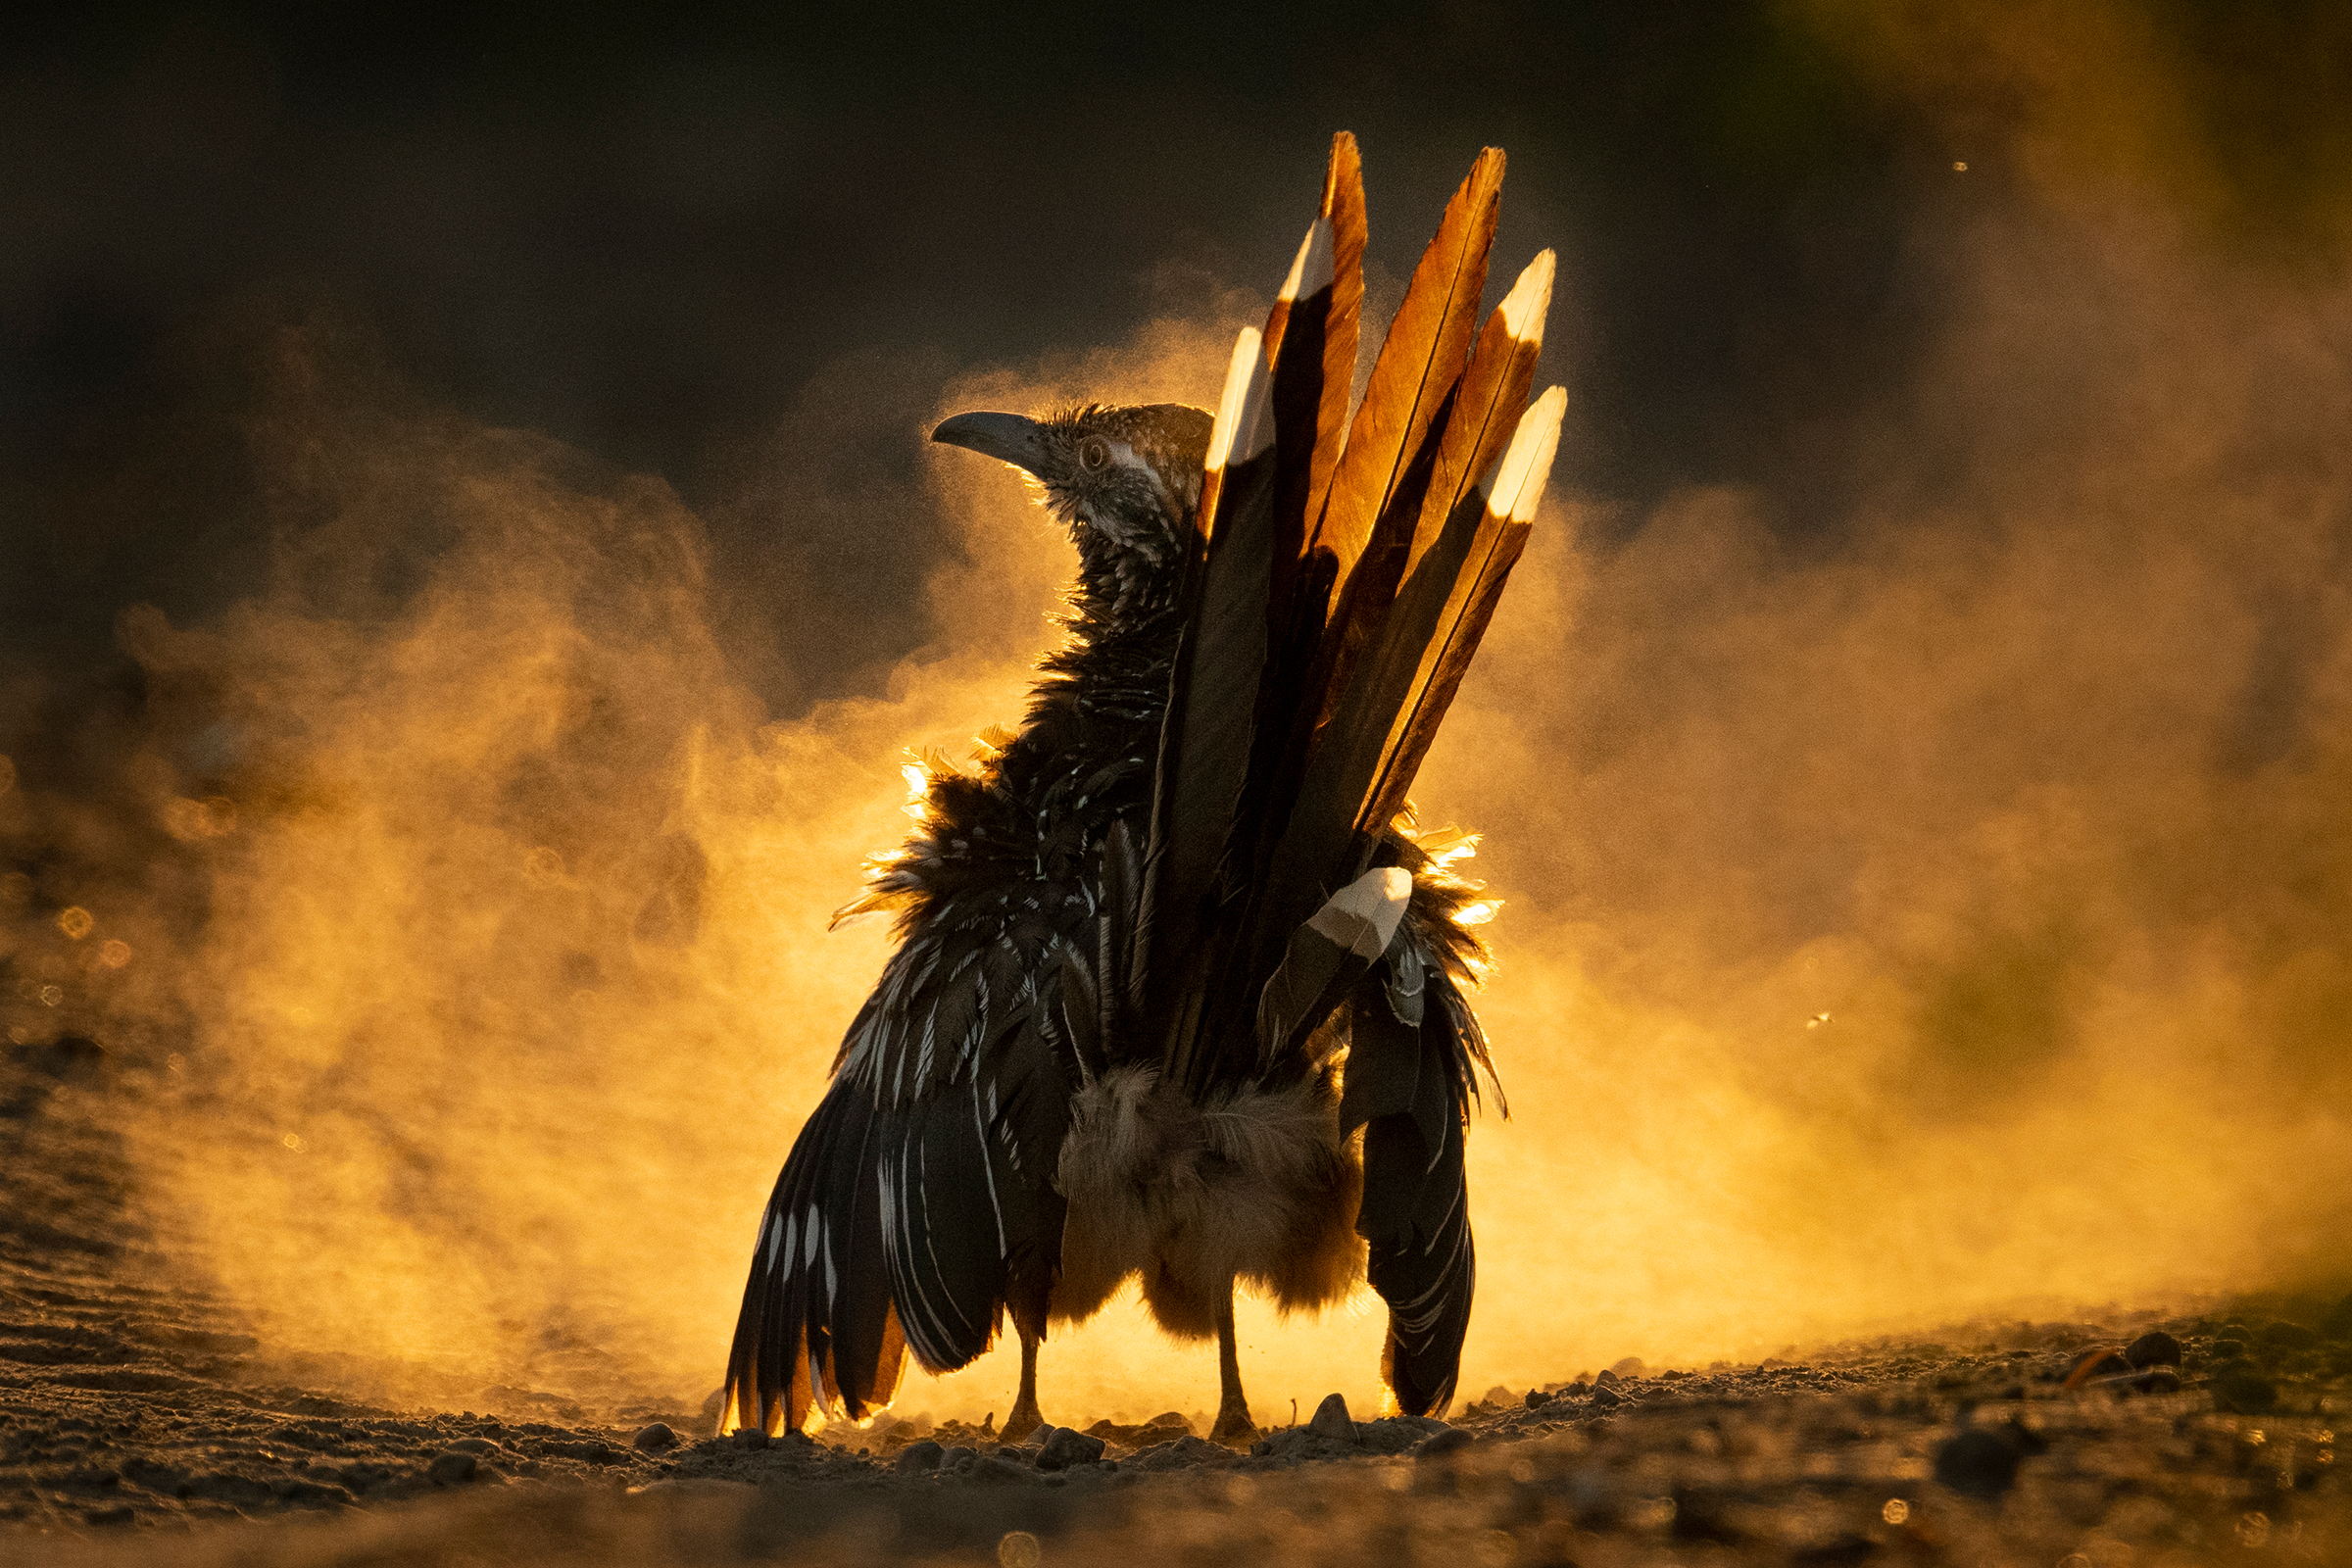 Check out these incredible images from the 2021 Audubon Photography Awards